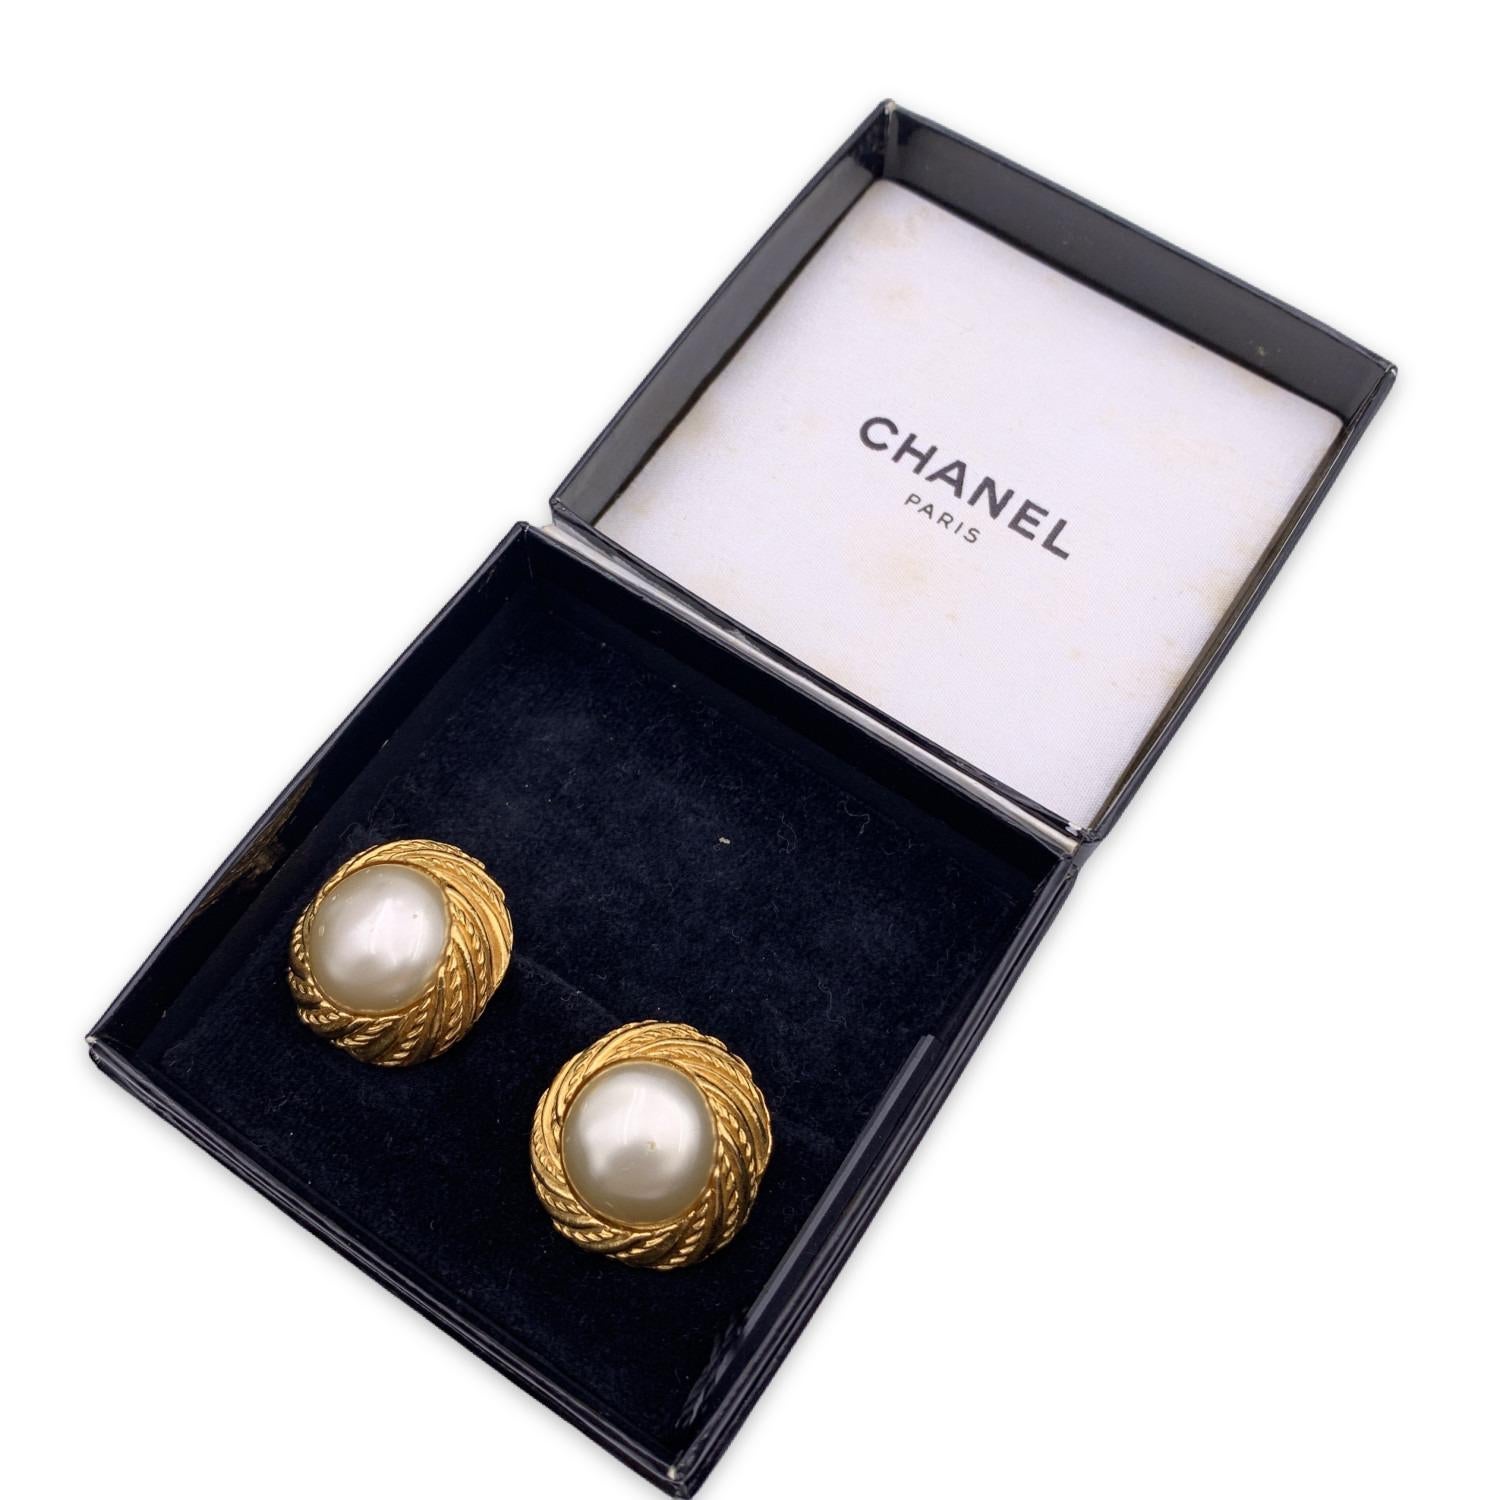 Gorgeous vintage CHANEL earrings. Faux Pearl and engraved gold metal round frame. Clip-on earrings. Signed 'Chanel - CC - Made in France' round hallmark on the reverse of the earring. Diameter: 1 inch. - 2,5 cm

Condition

B - VERY GOOD

Gently